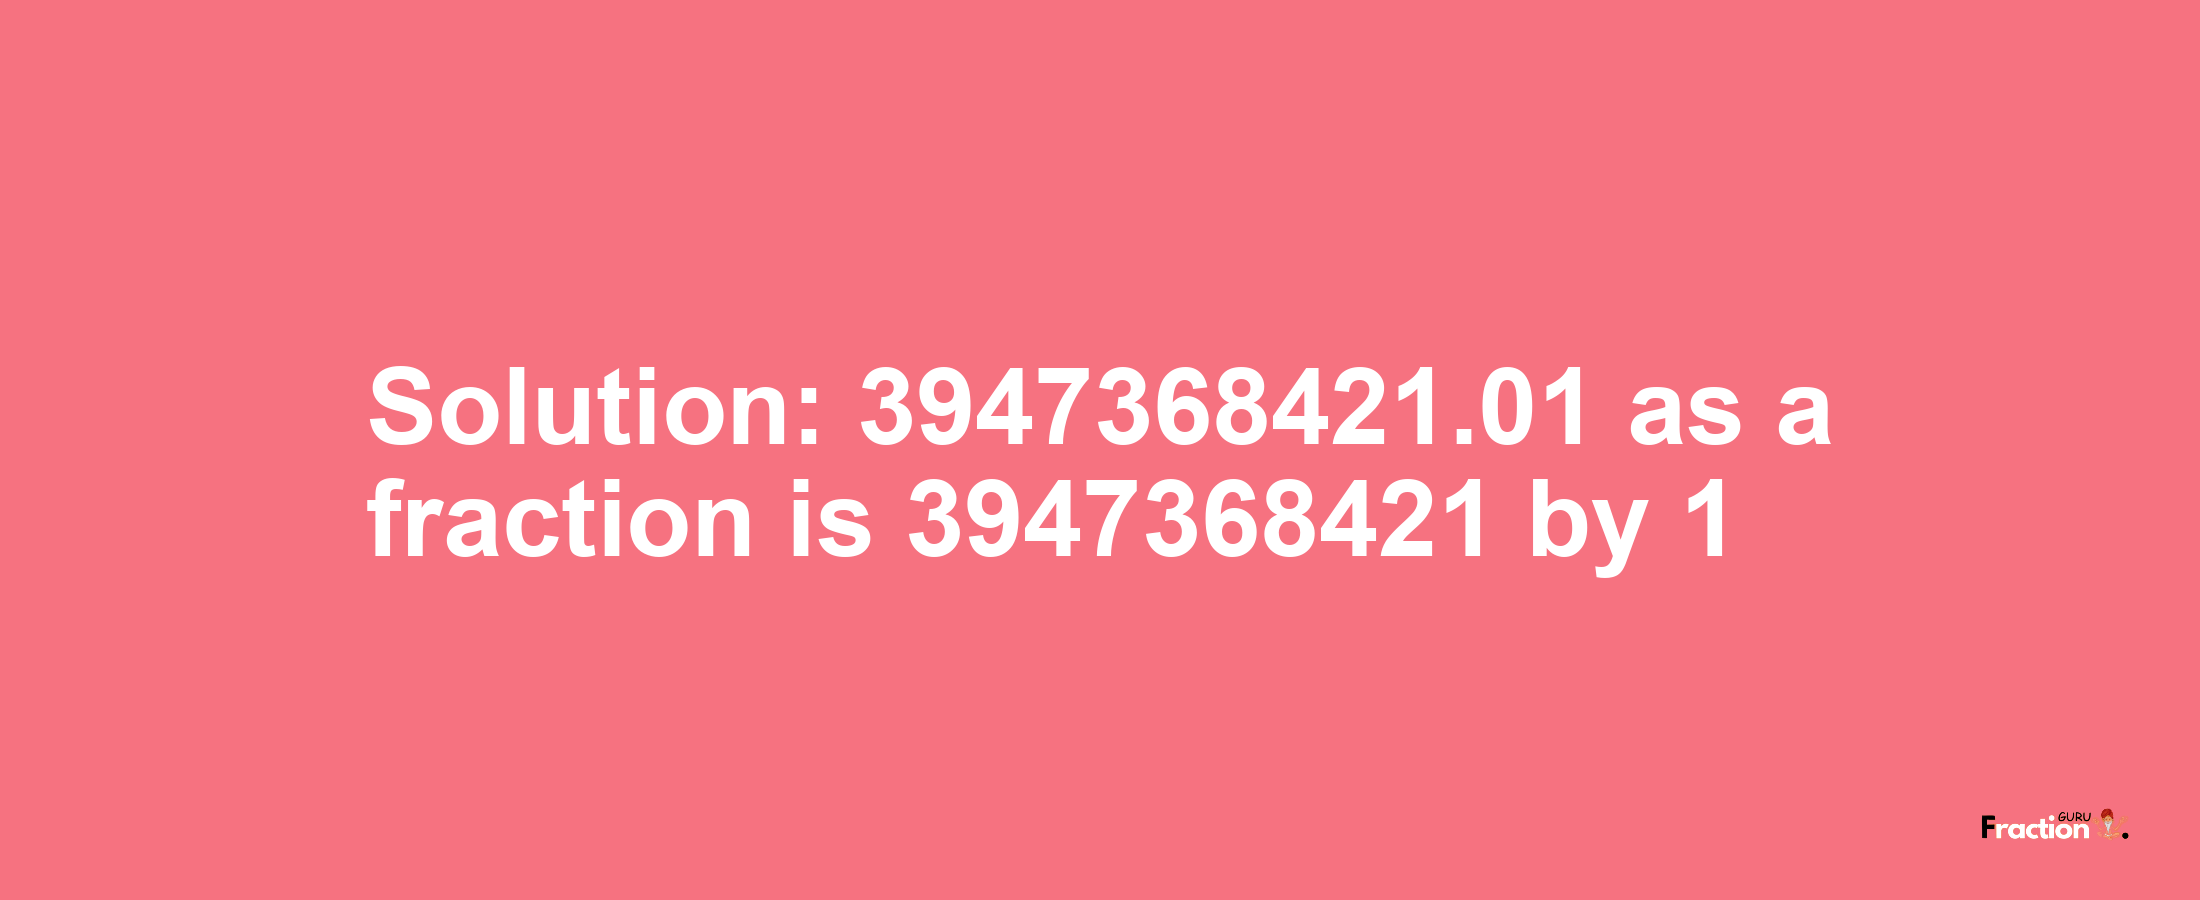 Solution:3947368421.01 as a fraction is 3947368421/1